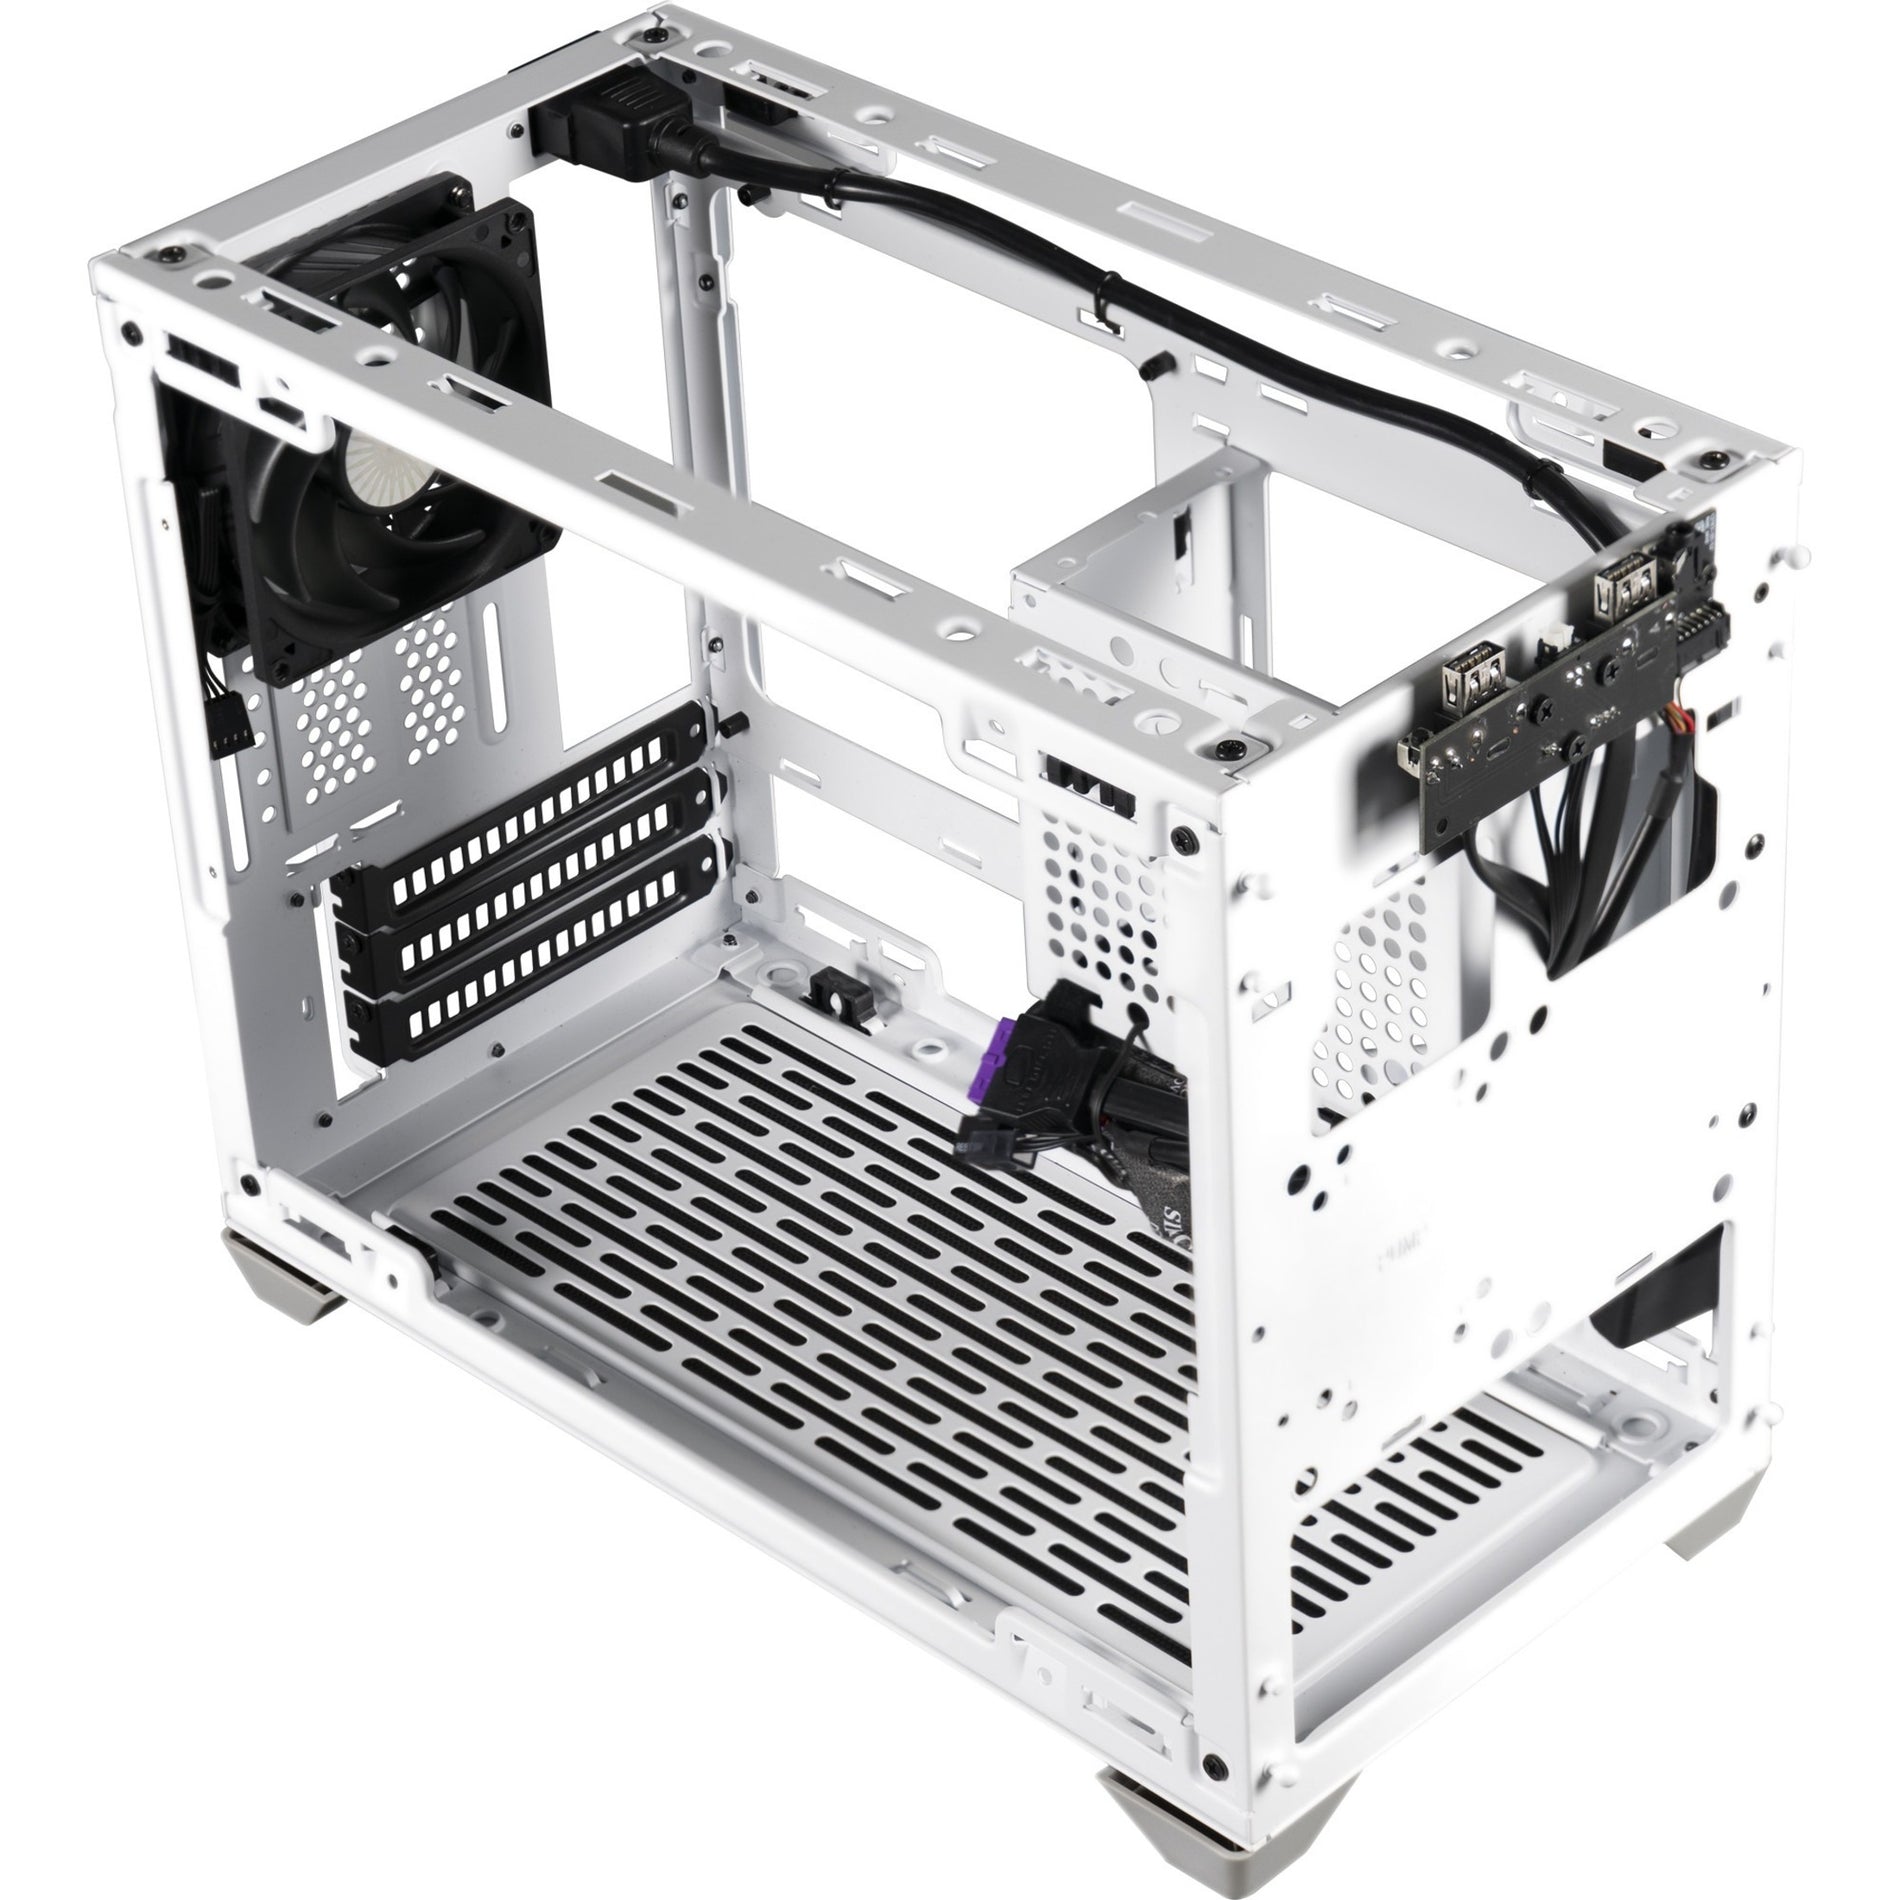 Cooler Master MCB-NR200-WNNN-S00 MasterBox Computer Case, Compact Design, 2.5" and 3.5" Internal Bays, 3 Expansion Slots, USB Ports, White